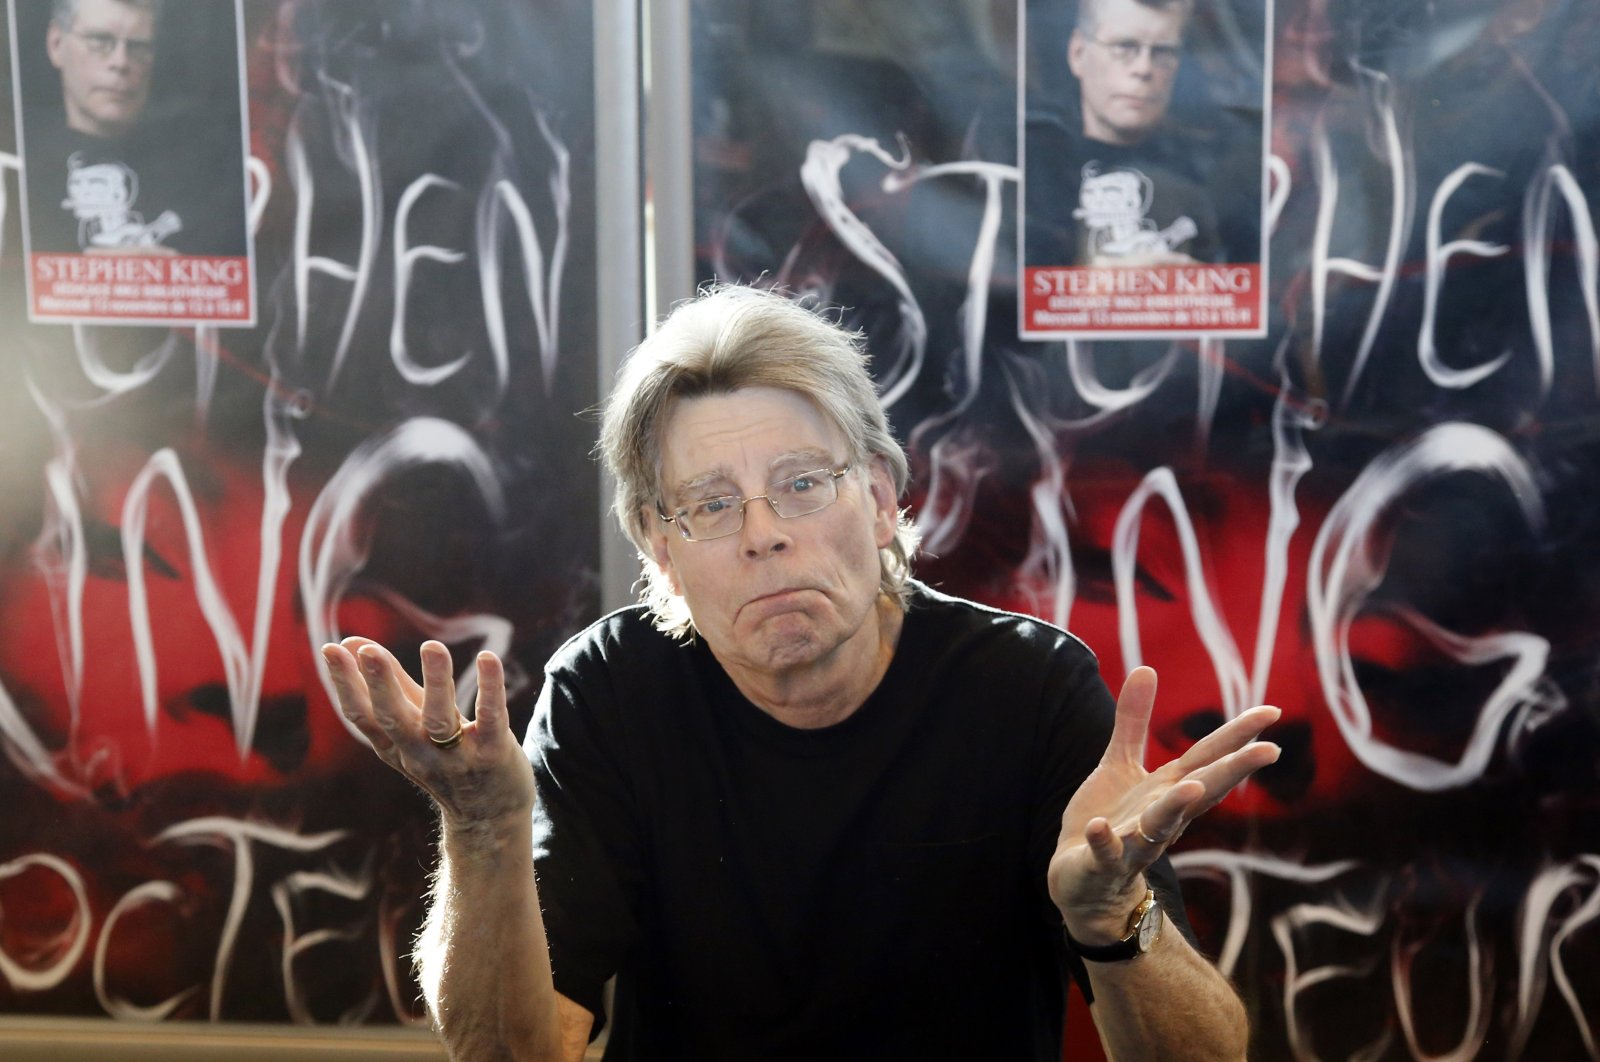 U.S. author Stephen King poses for the cameras during a promotional tour for &quot;Doctor Sleep,&quot; a sequel to &quot;The Shining,&quot; at a library in Paris, France, Nov. 13, 2013. (AP Photo)